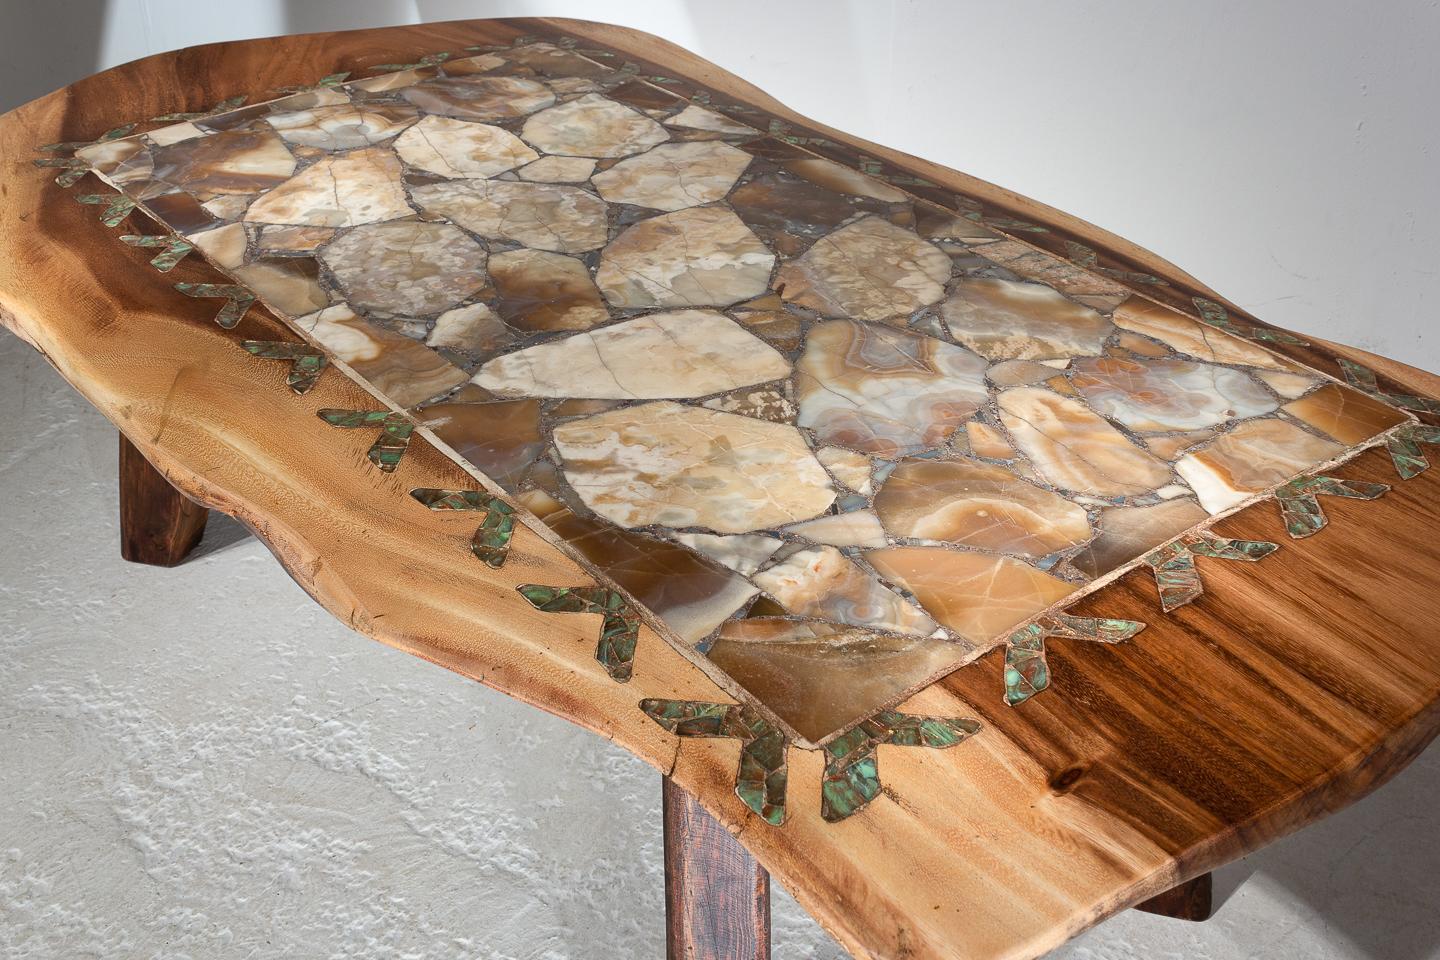 Agate Inlaid Coffee Table In Excellent Condition For Sale In Husbands Bosworth, Leicestershire